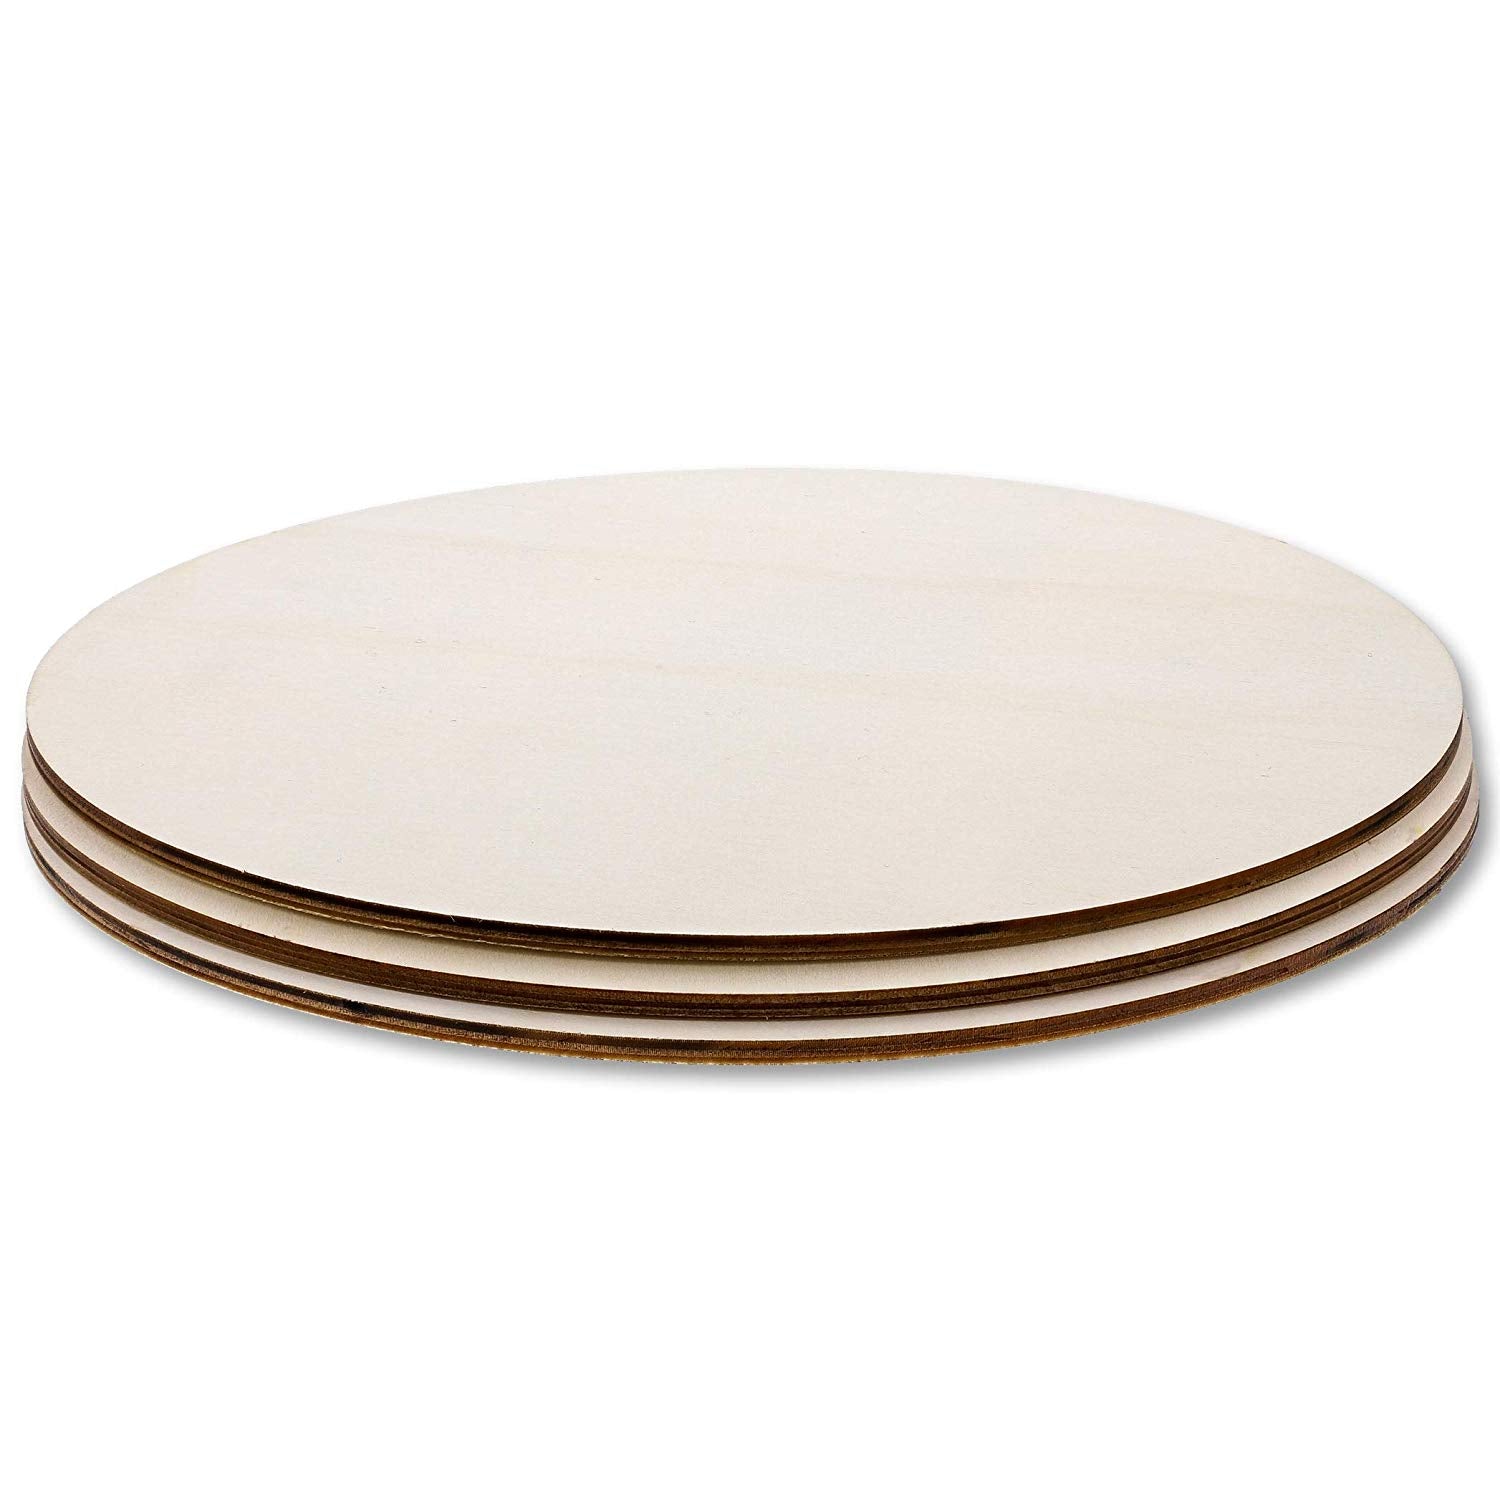 12 Pieces 12 Inch Wood Circles for Crafts - Unfinished Blank